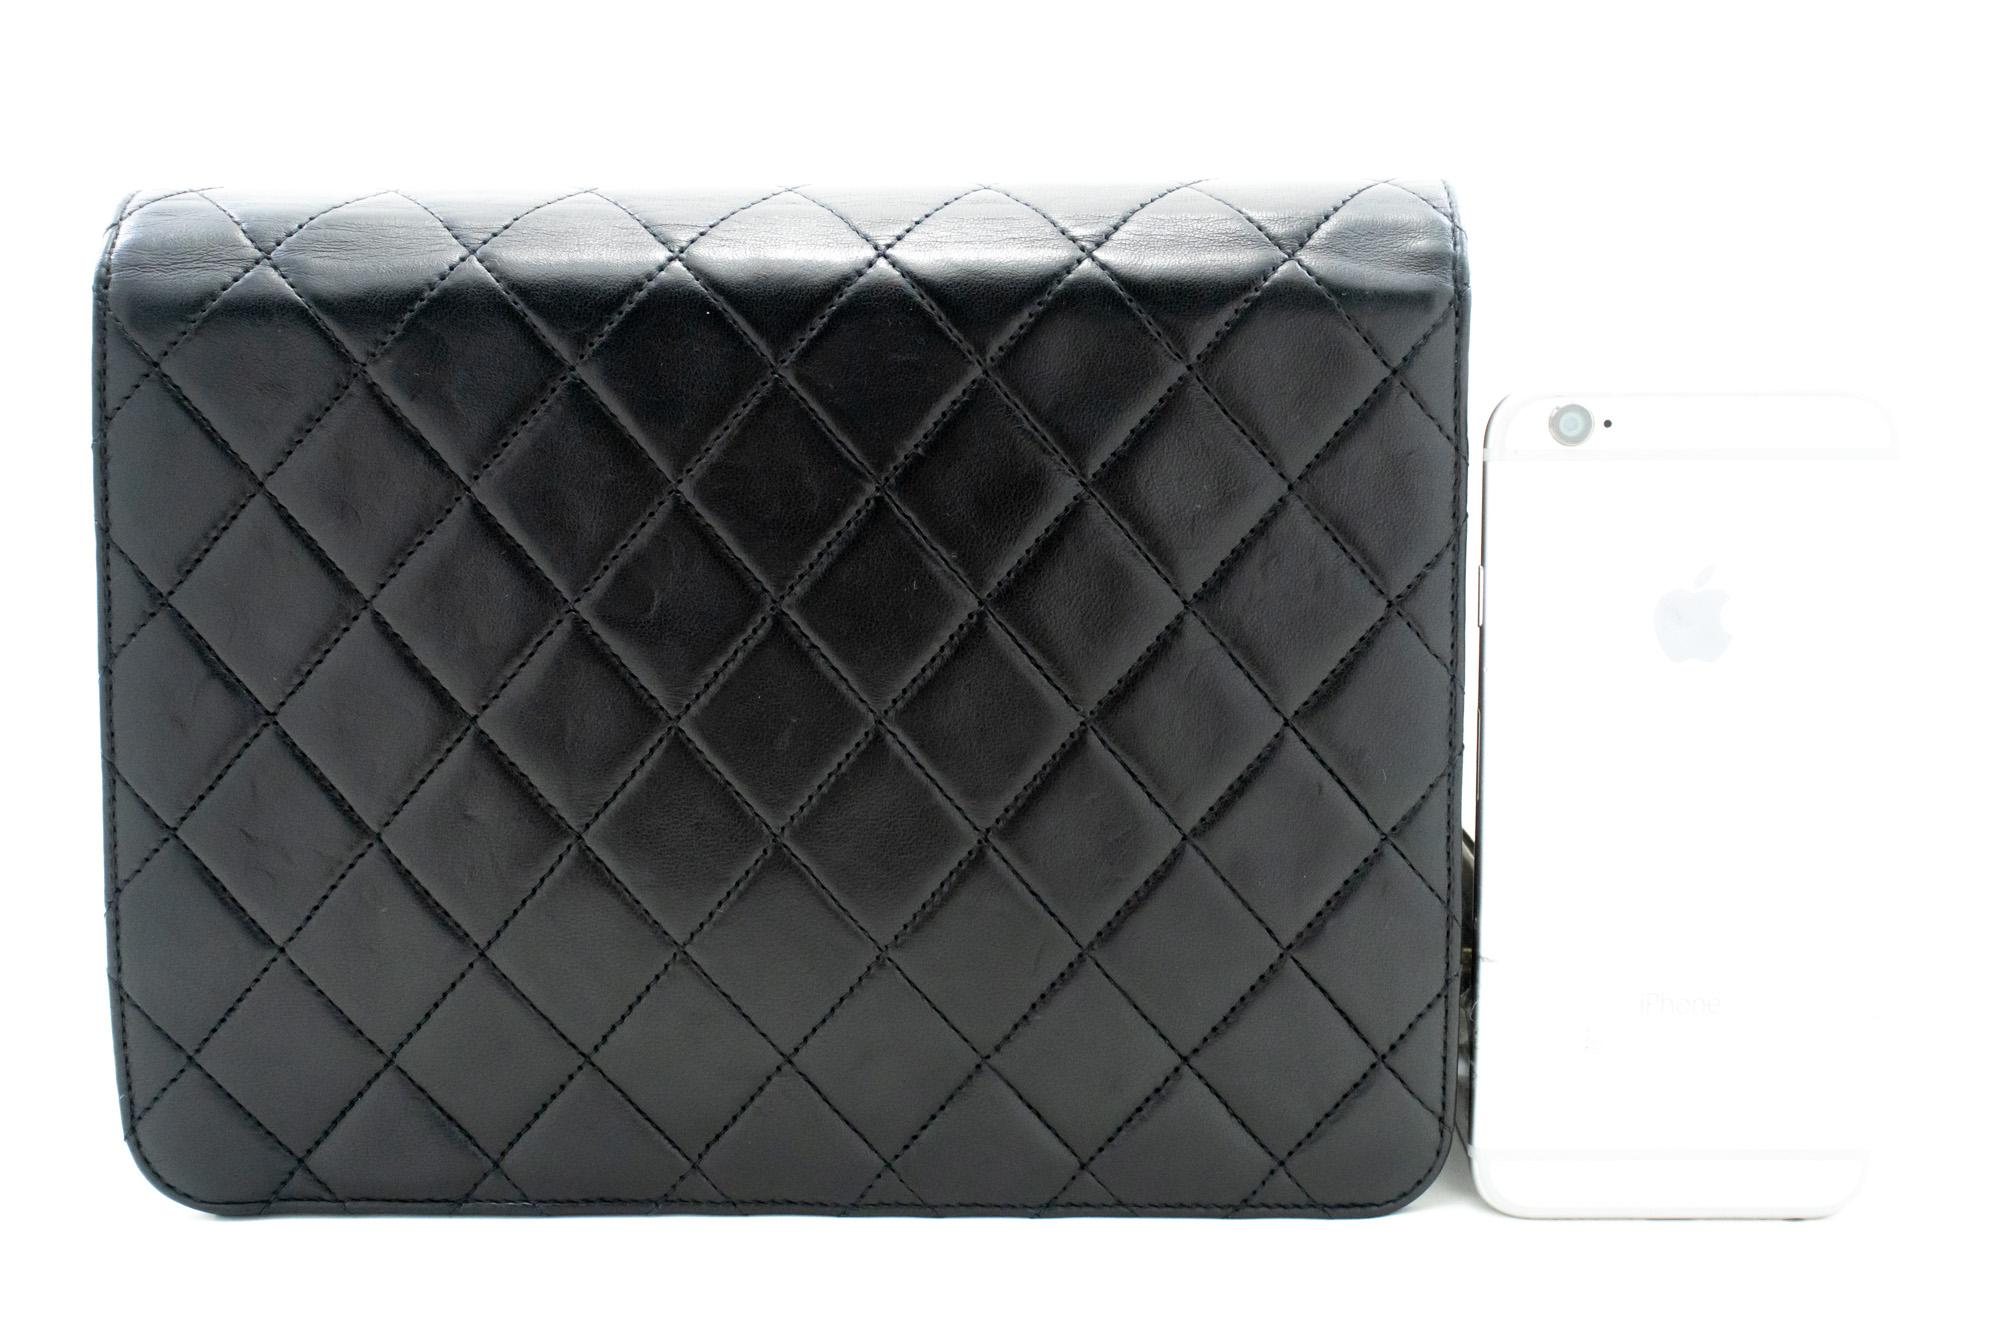 CHANEL Small Chain Shoulder Bag Black Clutch Flap Quilted Lambskin In Good Condition For Sale In Takamatsu-shi, JP